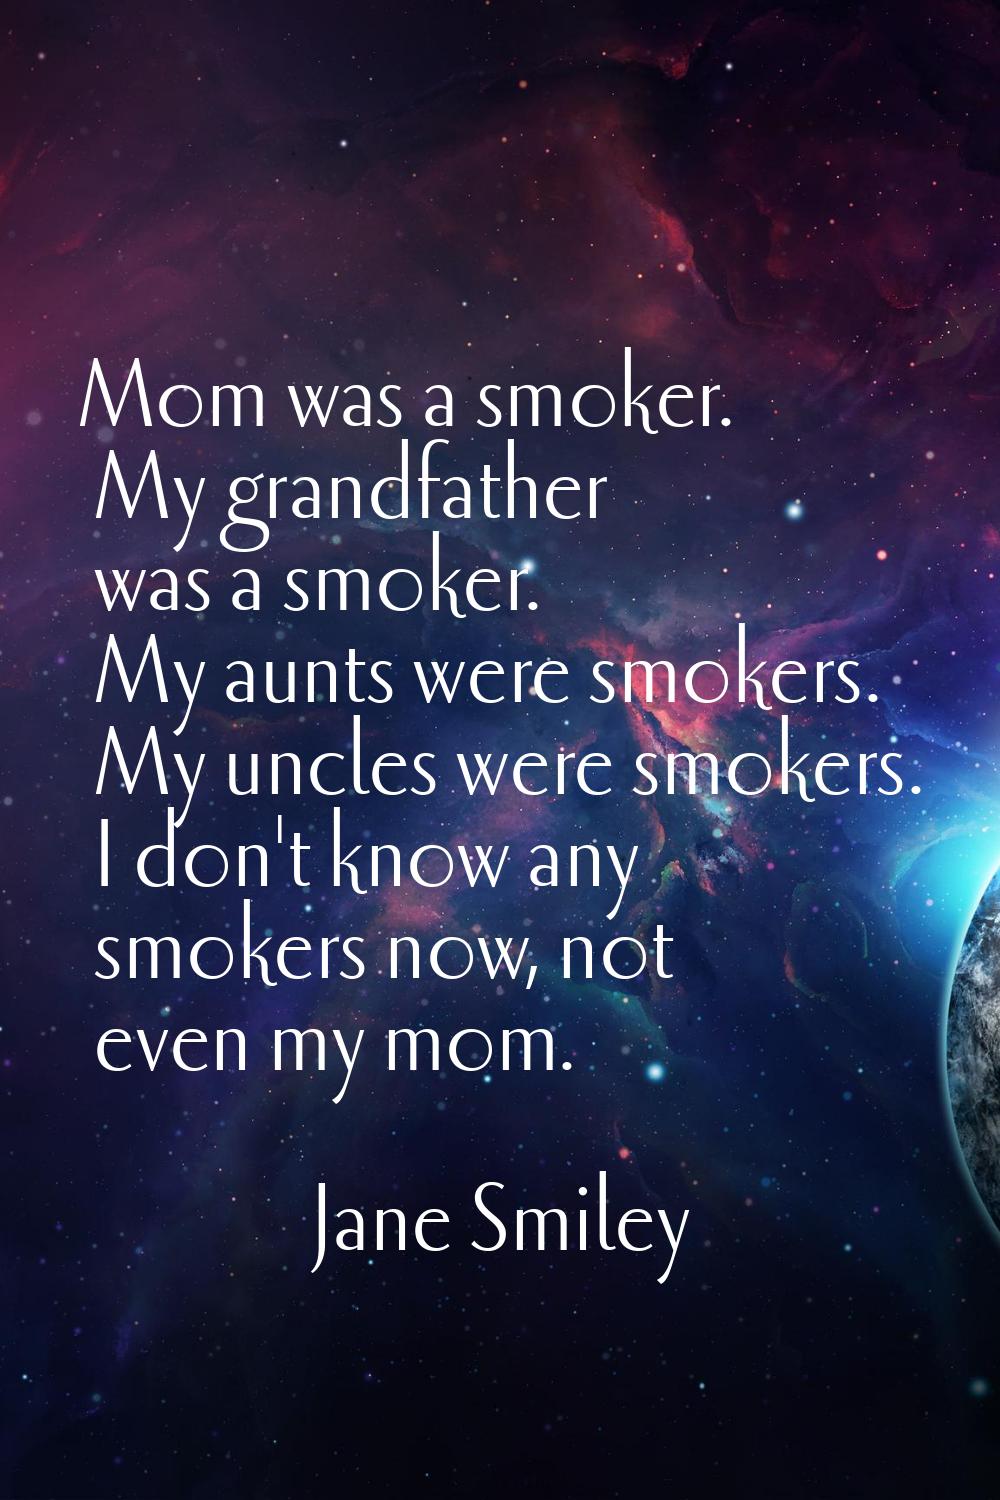 Mom was a smoker. My grandfather was a smoker. My aunts were smokers. My uncles were smokers. I don